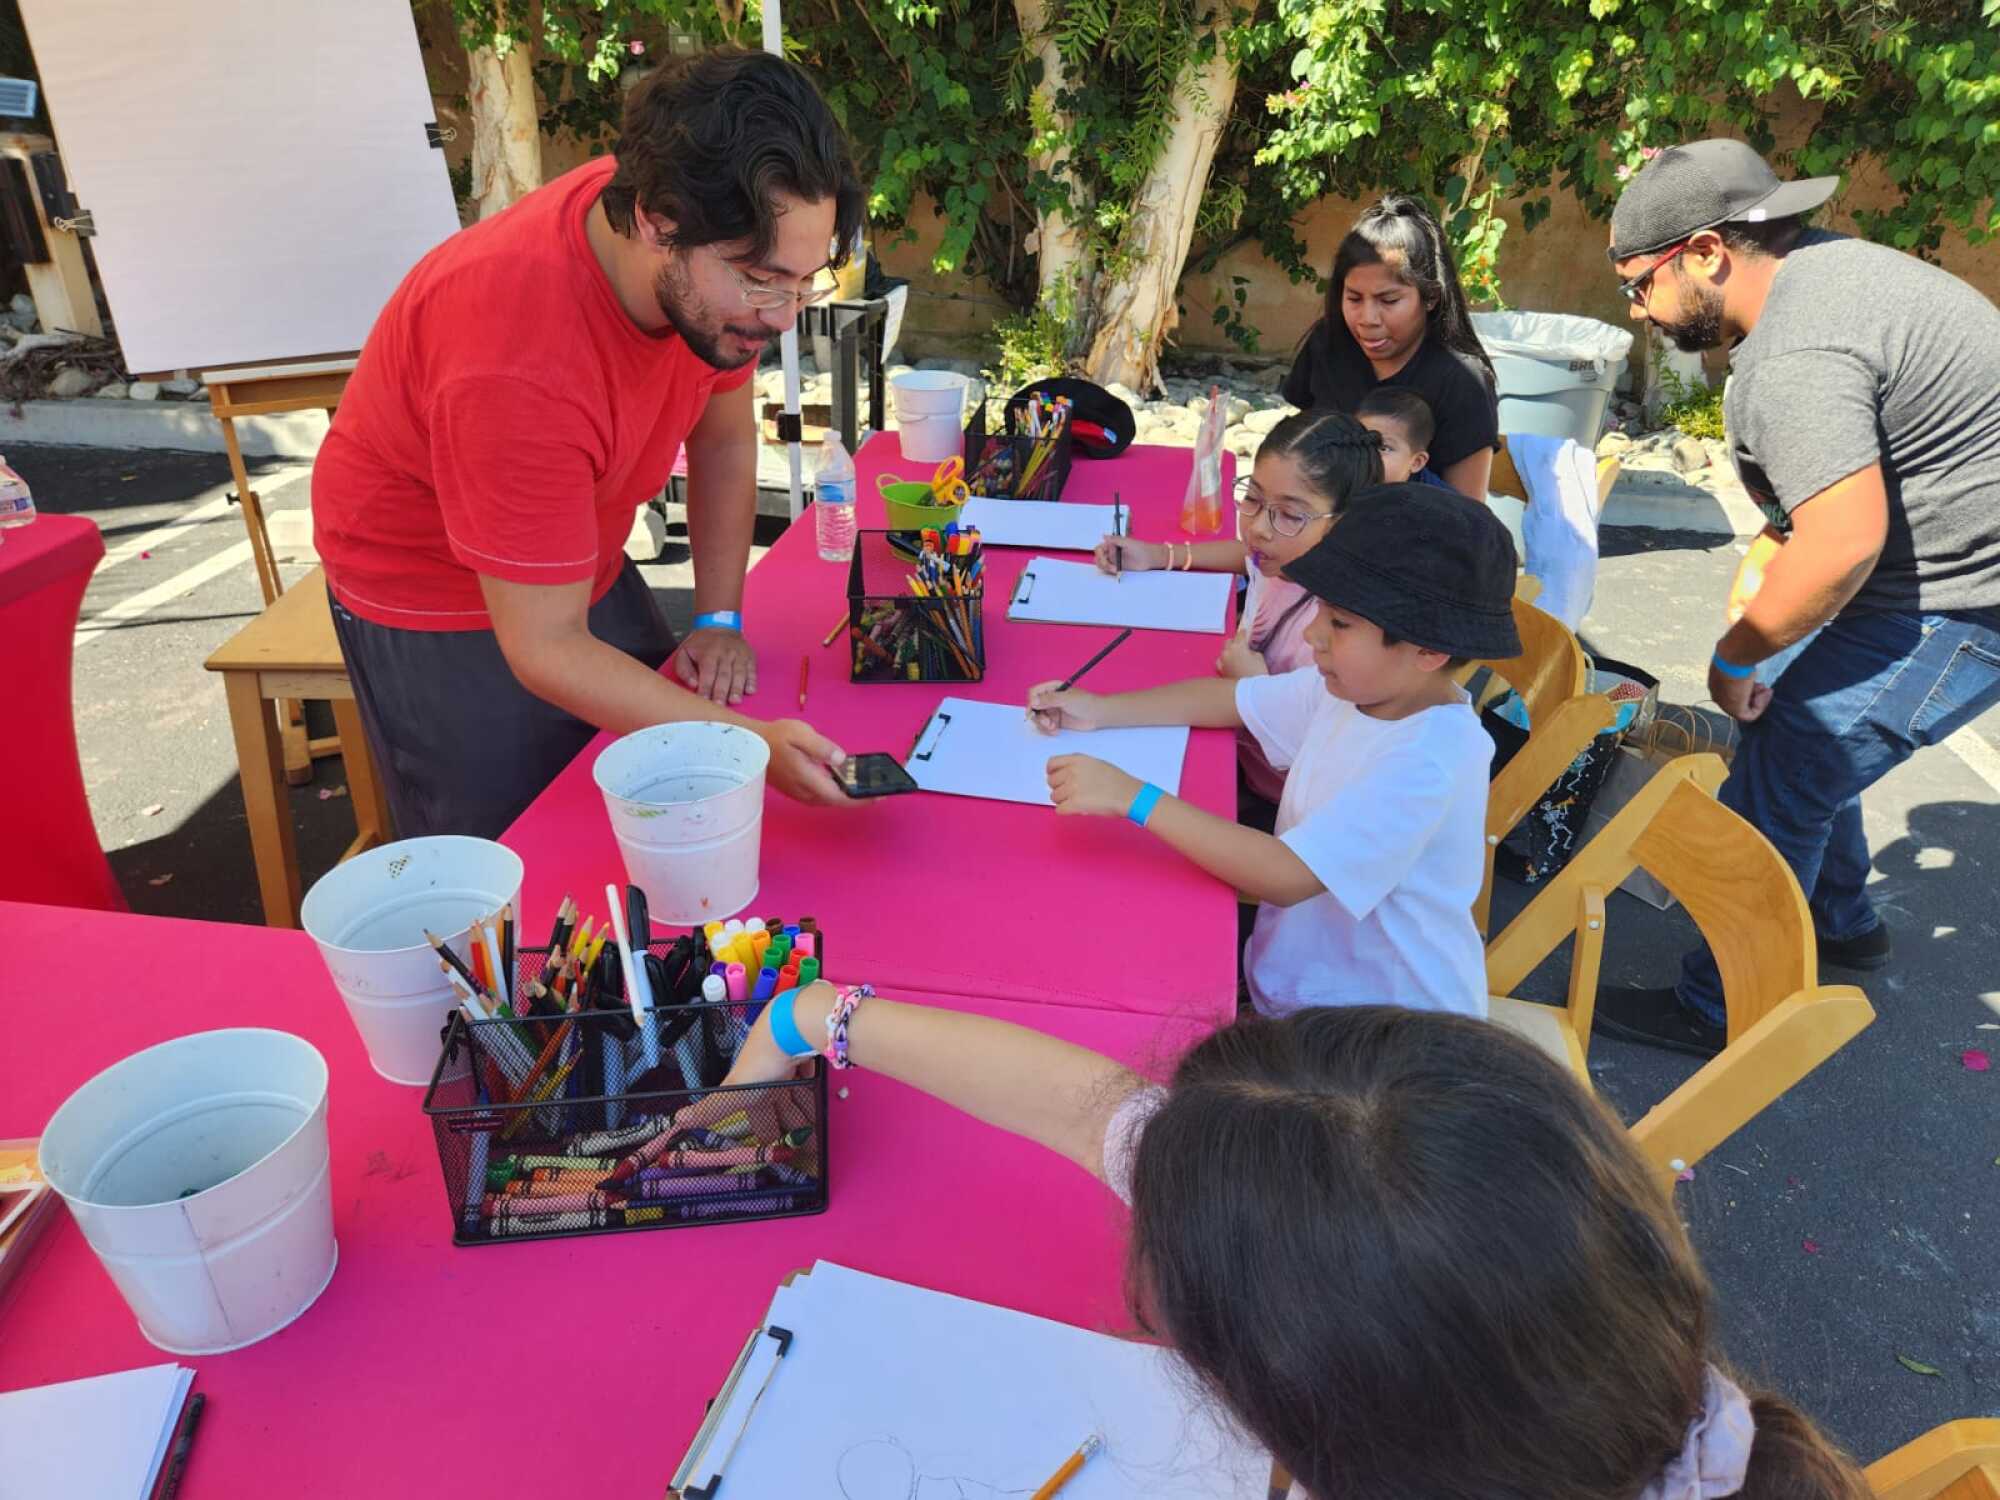 A man instructs children seated at a table